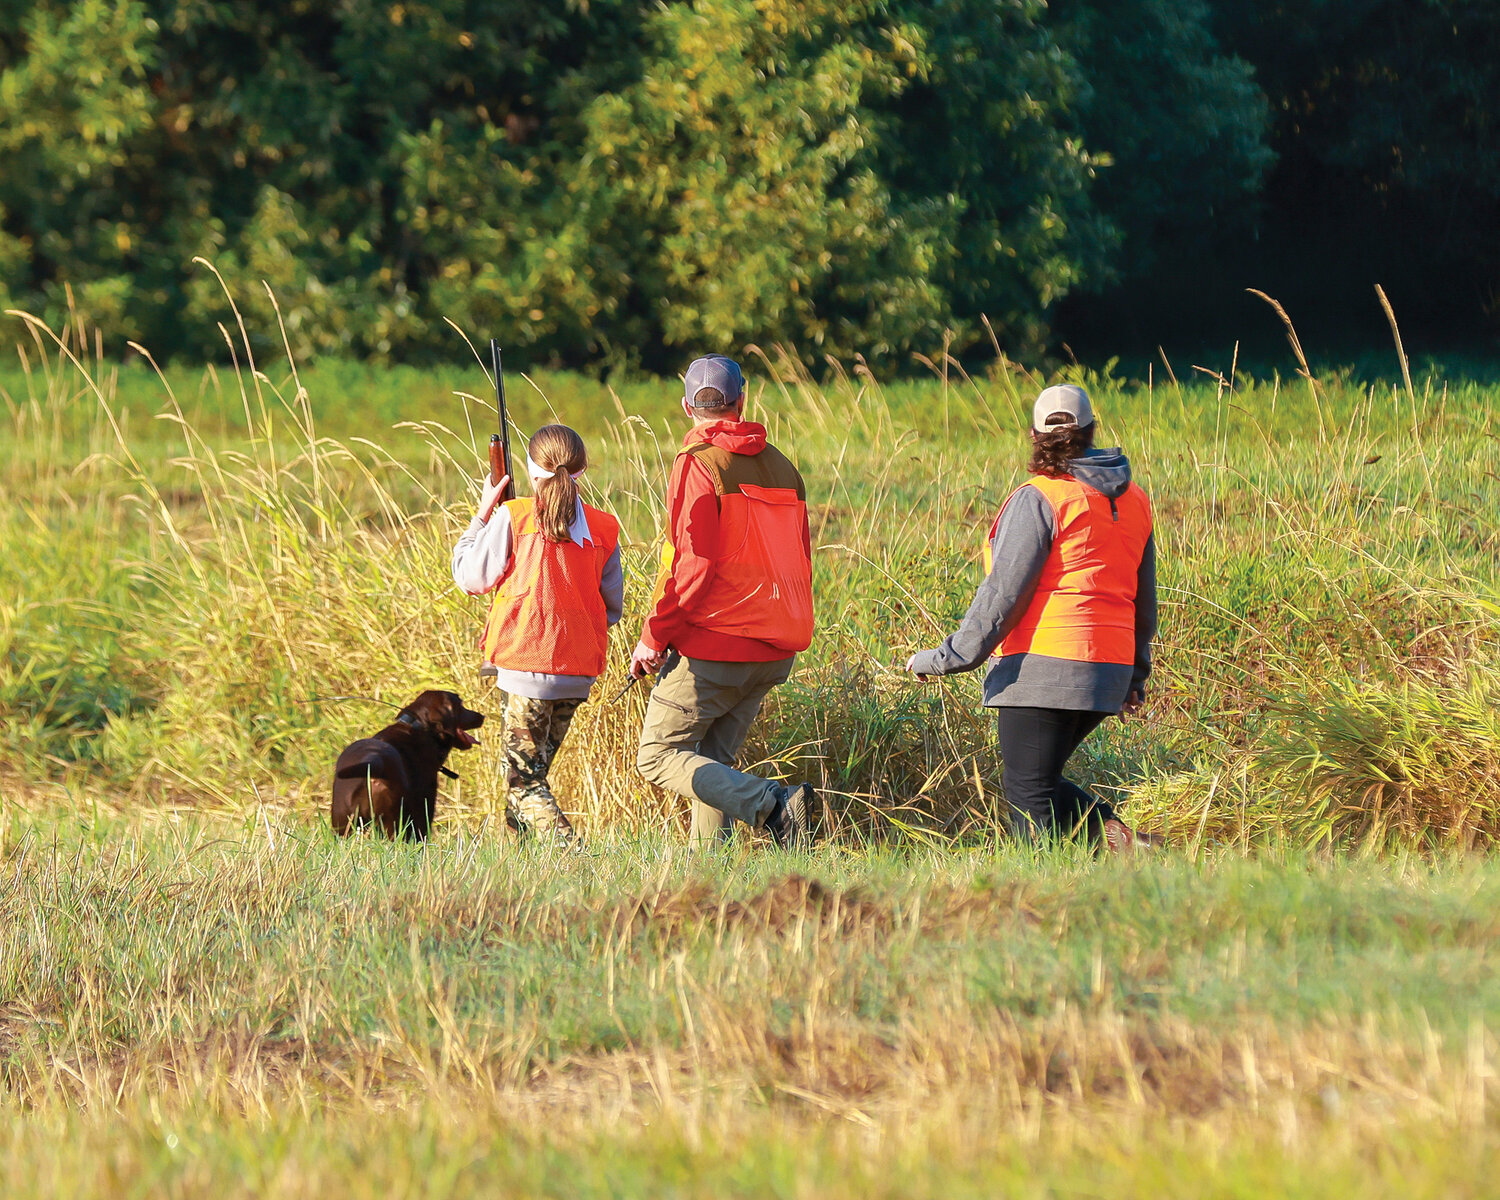 Hunters take to the field on Saturday, Sept. 16 in hopes of shooting the limit of two pheasants during the youth pheasant hunt at the Shillapoo Wildlife Area near Vancouver Lake.